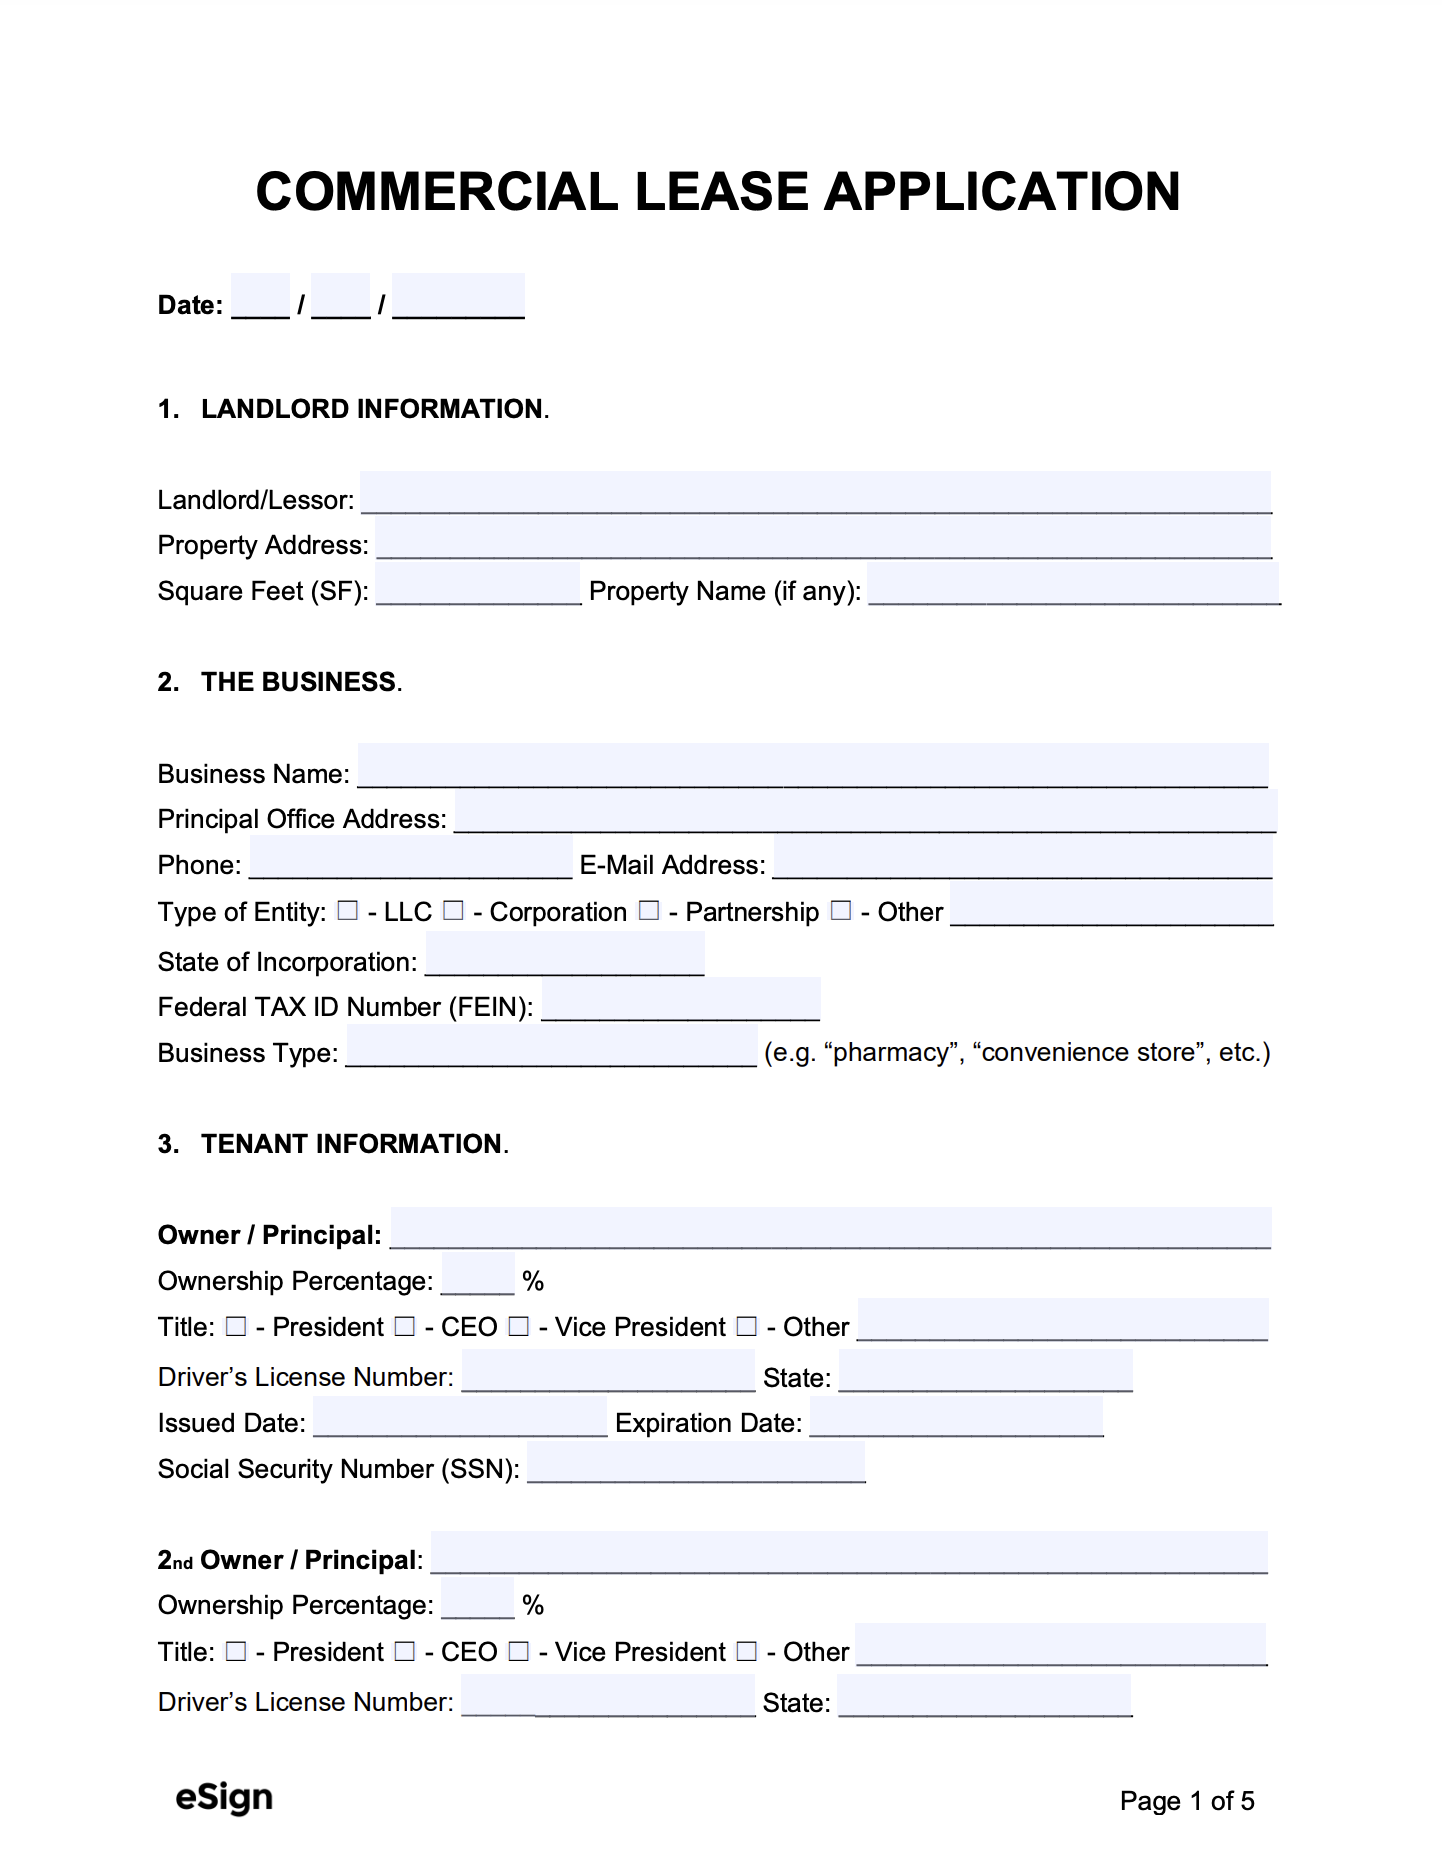 eSign Commercial Application Form